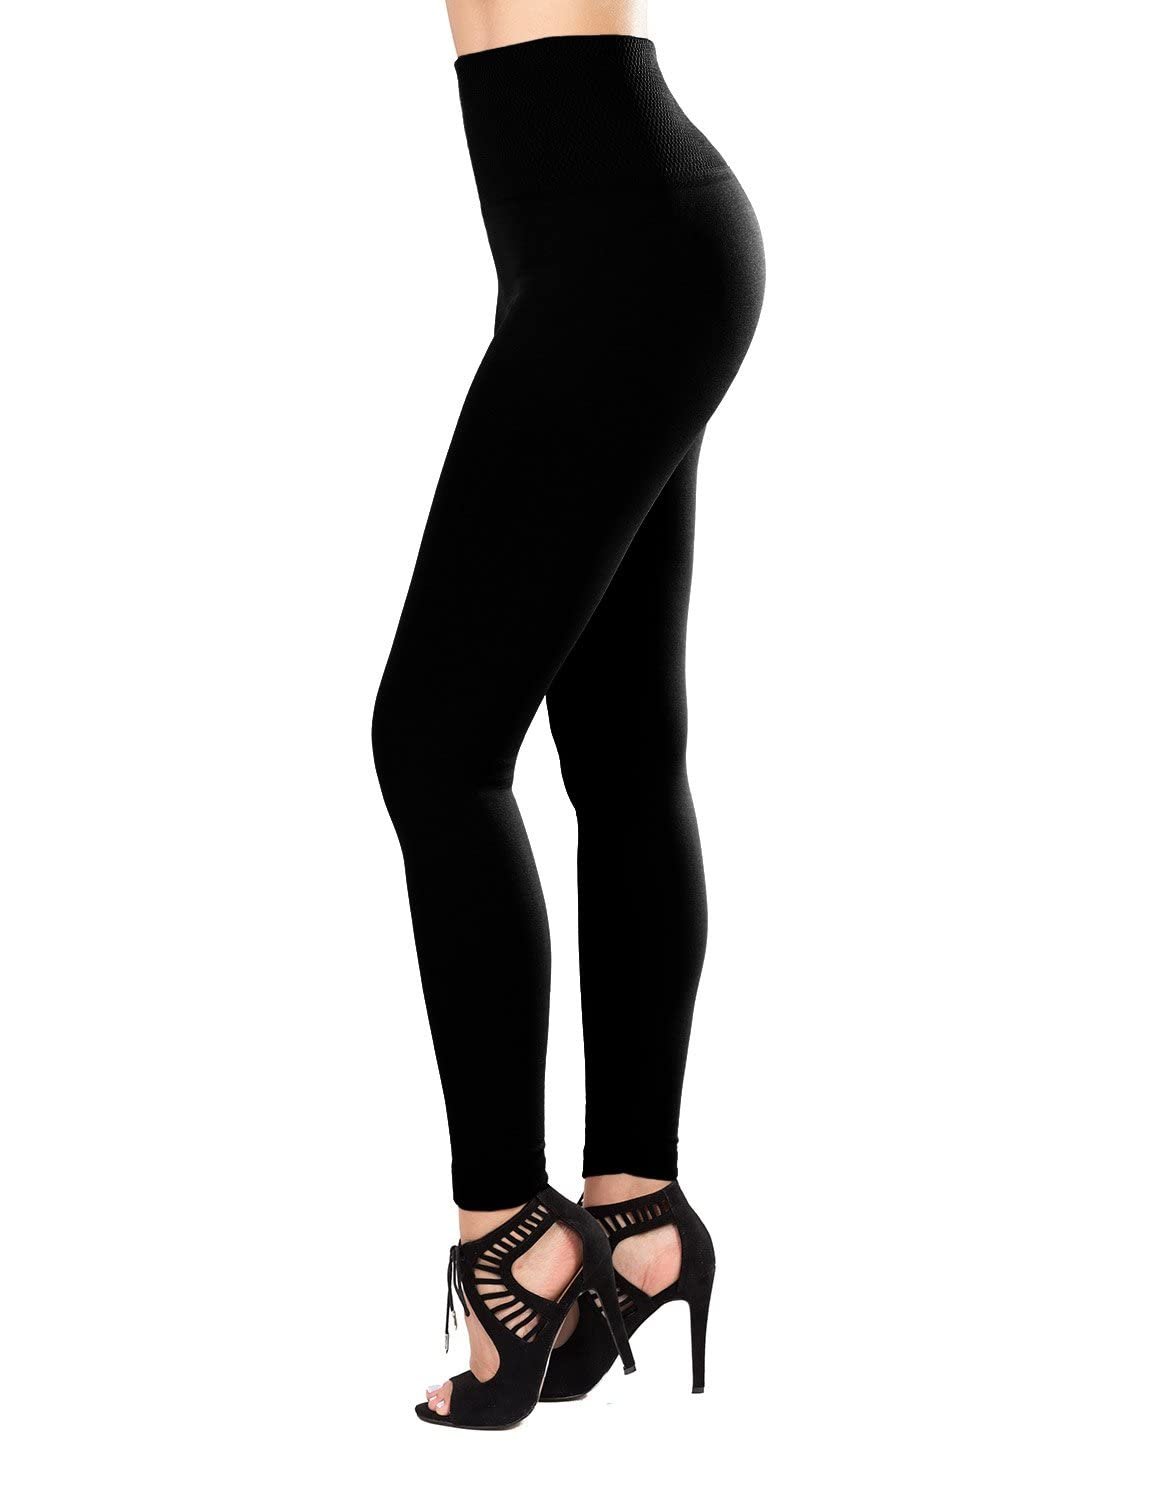 SATINA High Waisted Leggings for Women | Tummy Control & Compression Waistband (One Size, Black)